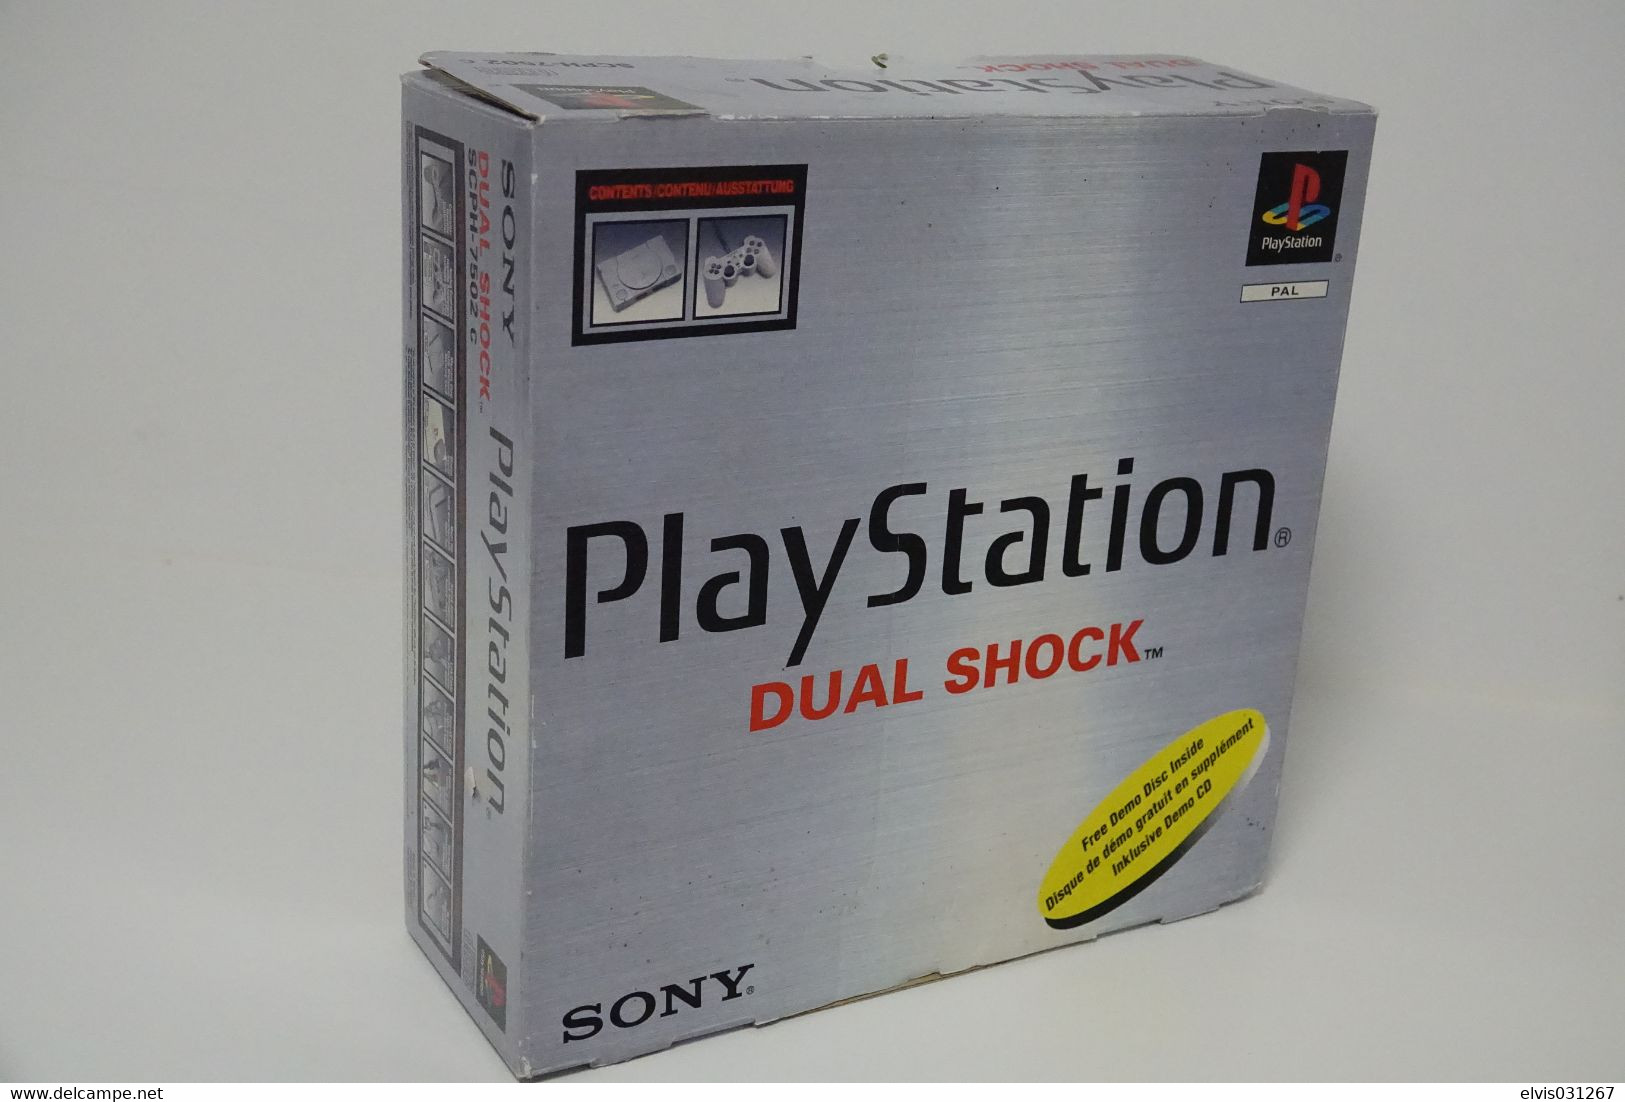 SONY PLAYSTATION ONE PS1 : DUAL SHOCK CONSOLE SYSTEM IN BOX WITH DEMO DISC AND CONTROLLER - SCPH-9001